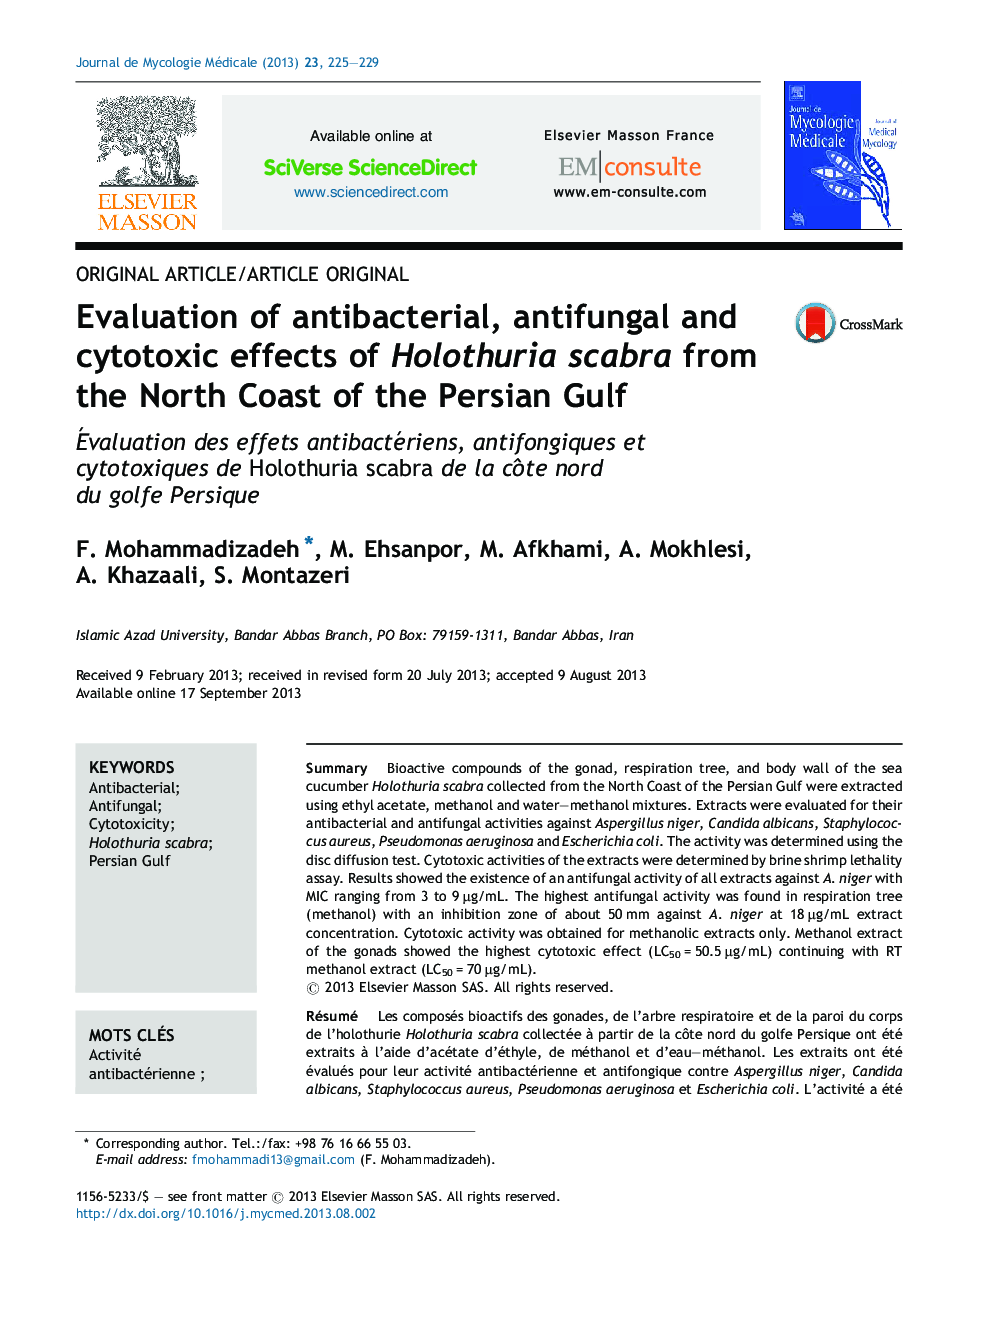 Evaluation of antibacterial, antifungal and cytotoxic effects of Holothuria scabra from the North Coast of the Persian Gulf